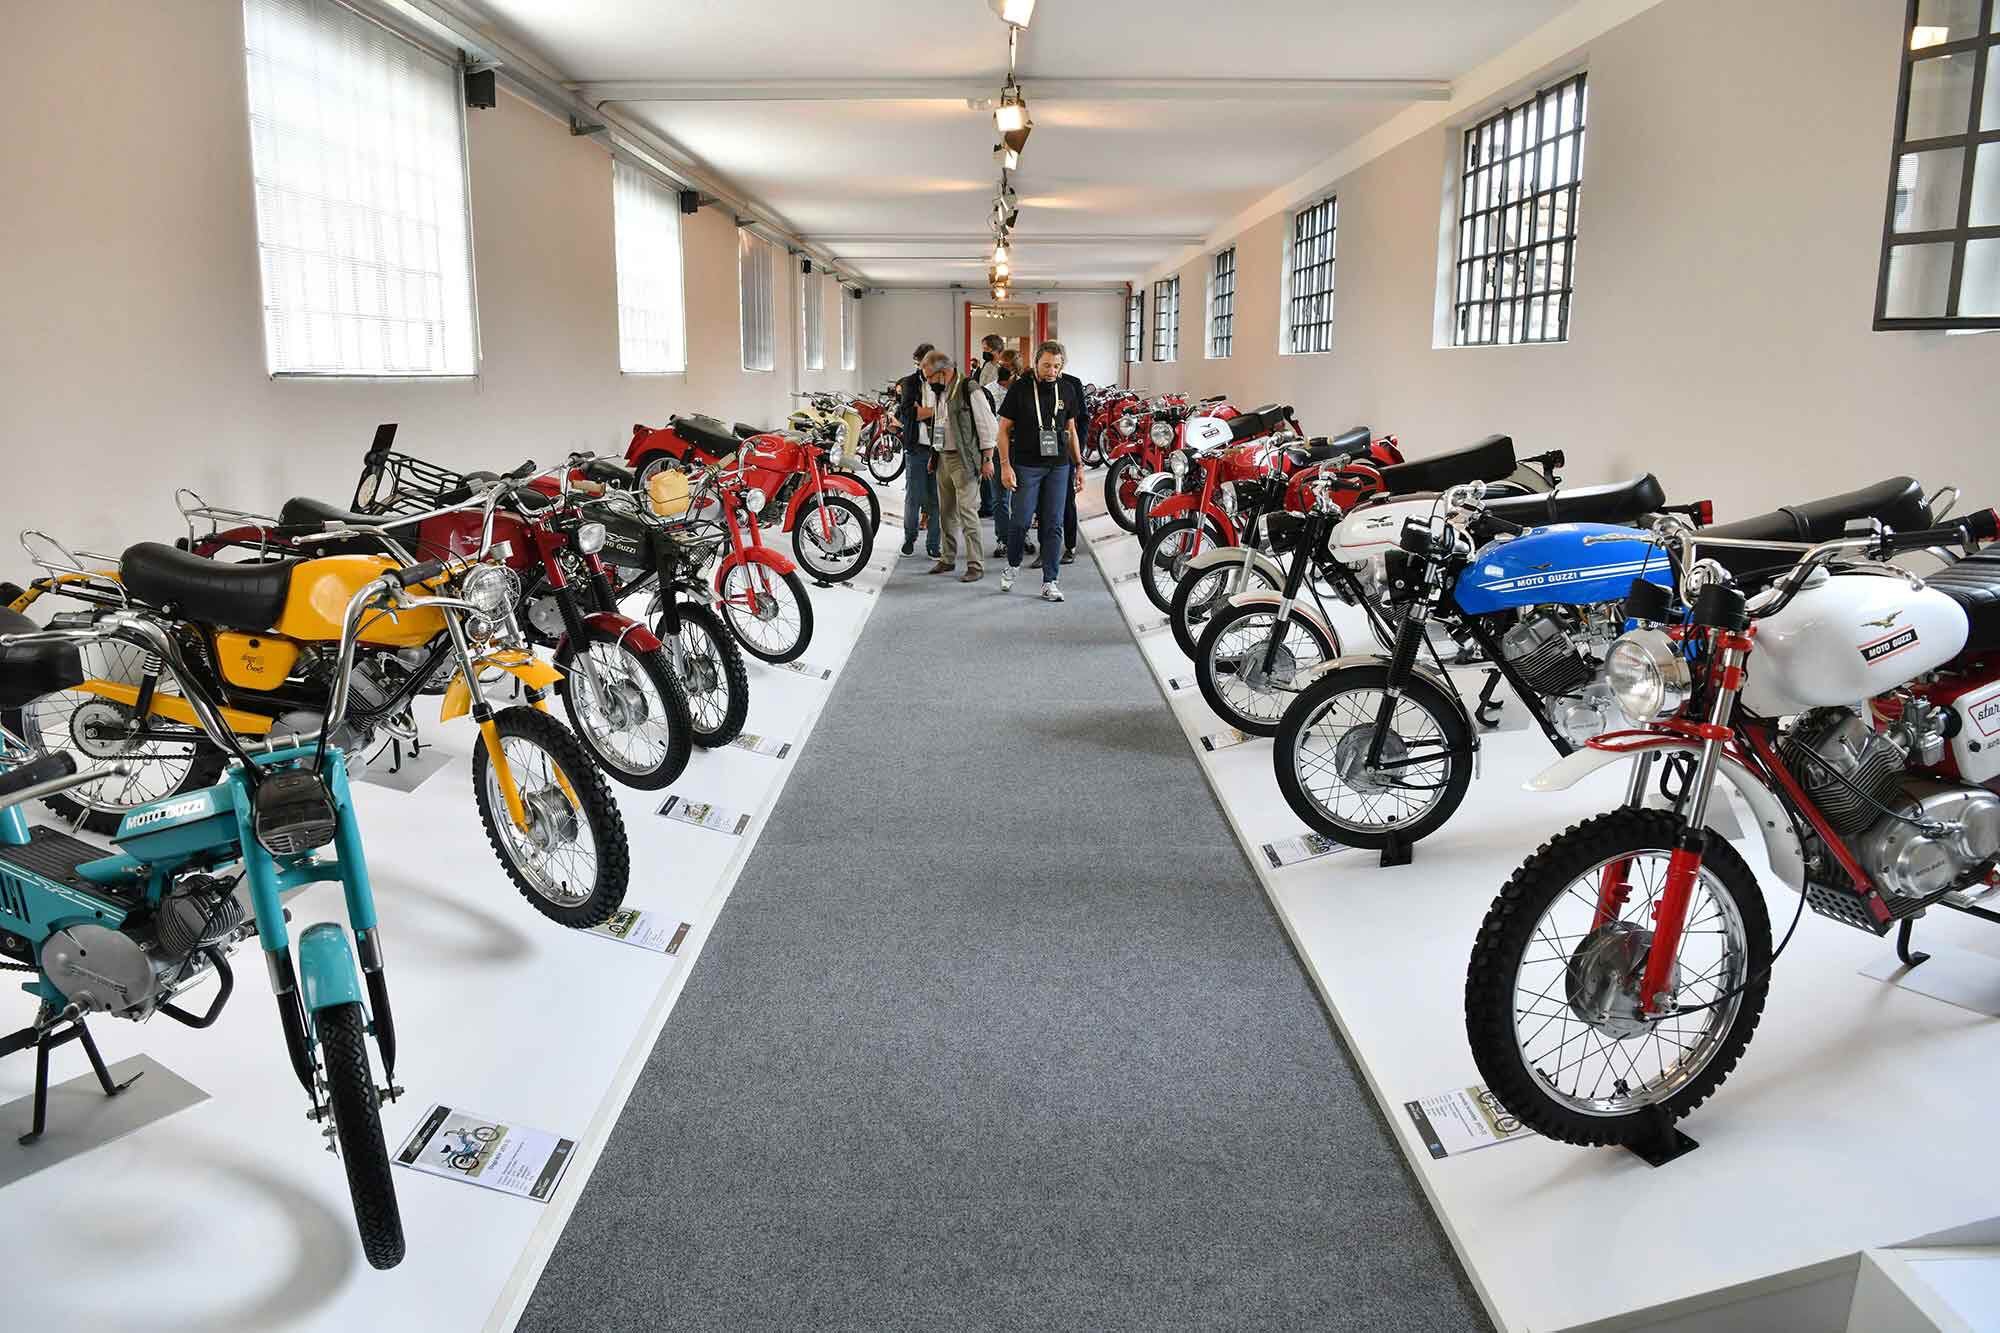 Moto Guzzi history, circa 1970s to 1980s, represented in the recently reopened museum.